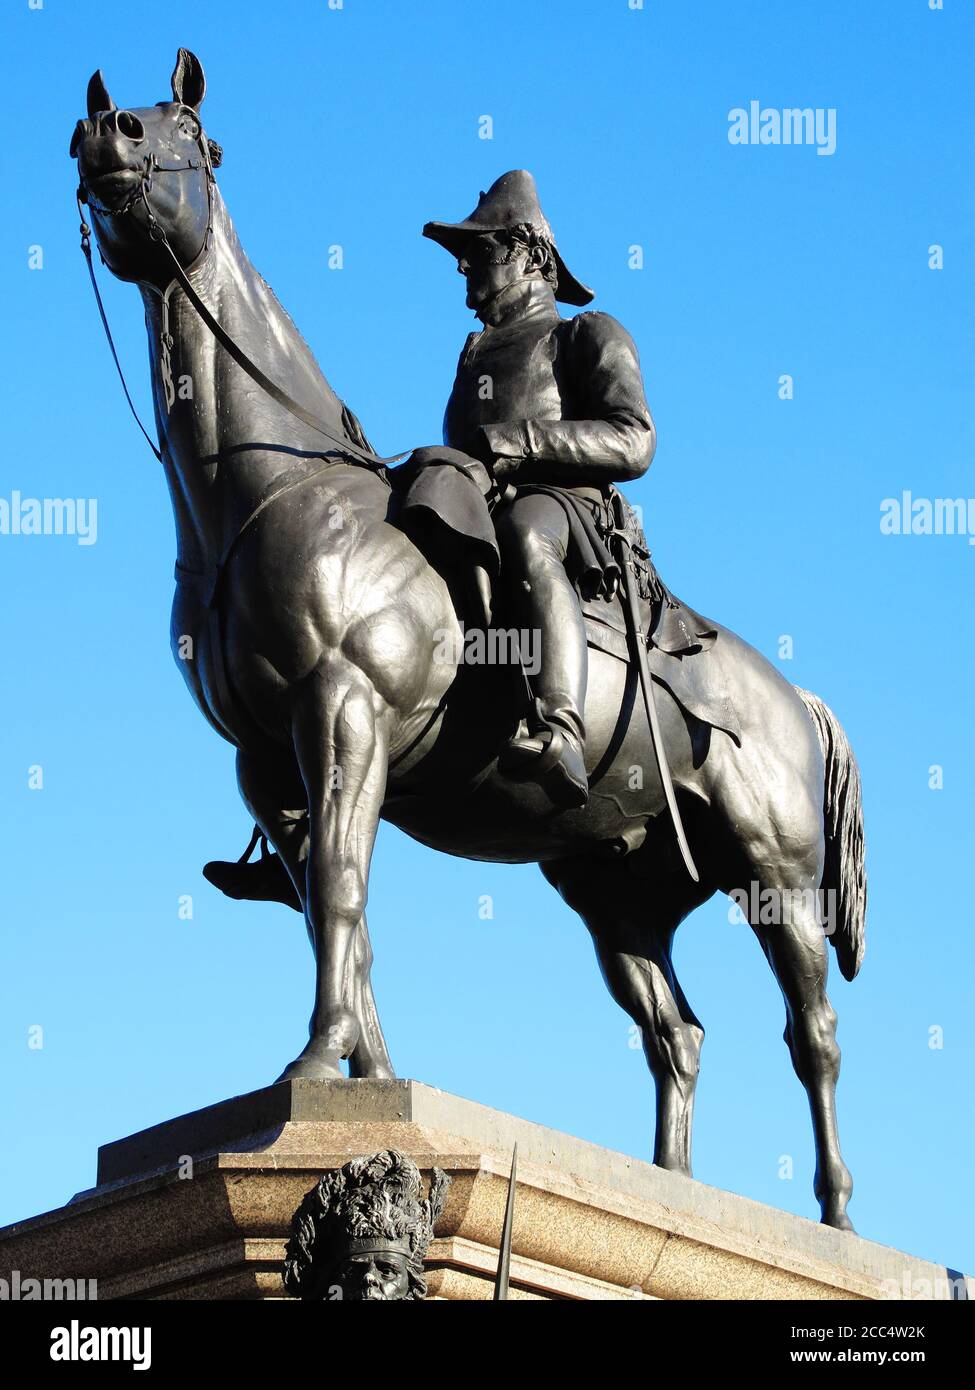 Victorian bronze equestrian statue of the Duke of Wellington on his horse Copenhagen unveiled in 1888 at Hyde Park Corner London England UK which is a Stock Photo